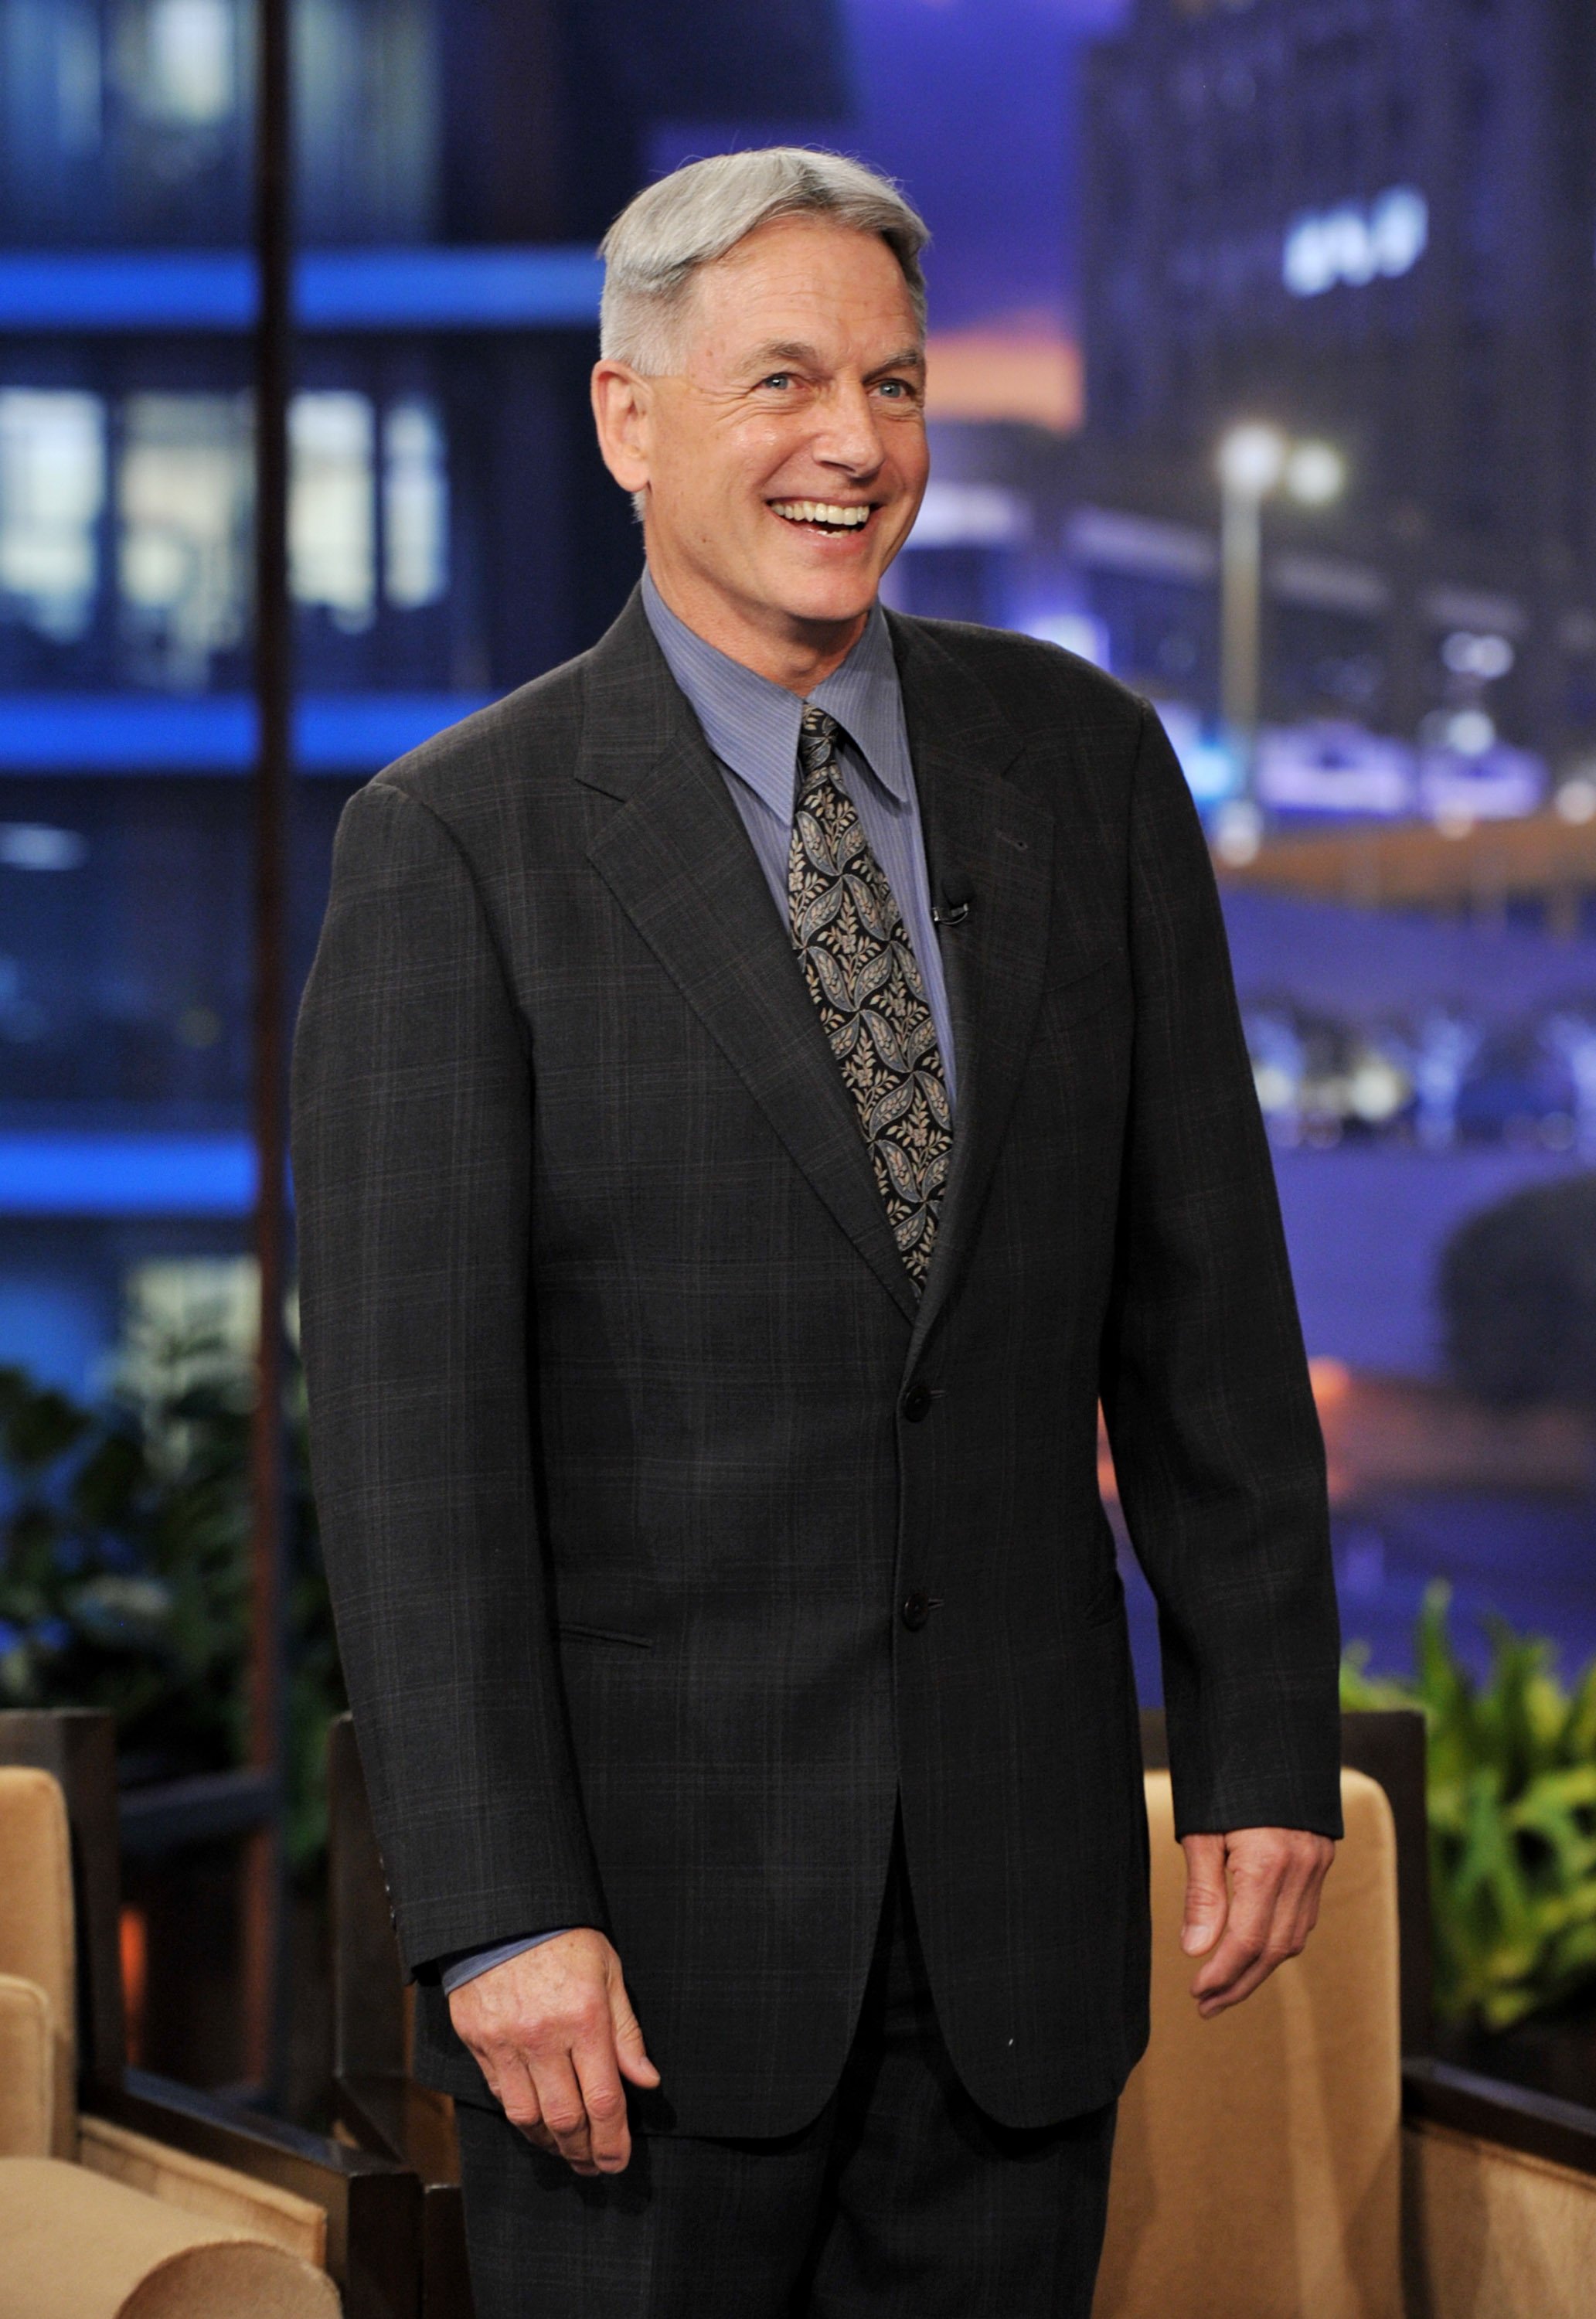 Mark Harmon appears on the Tonight Show With Jay Leno at NBC Studios on January 31, 2012 in Burbank, California. | Source: Getty Images